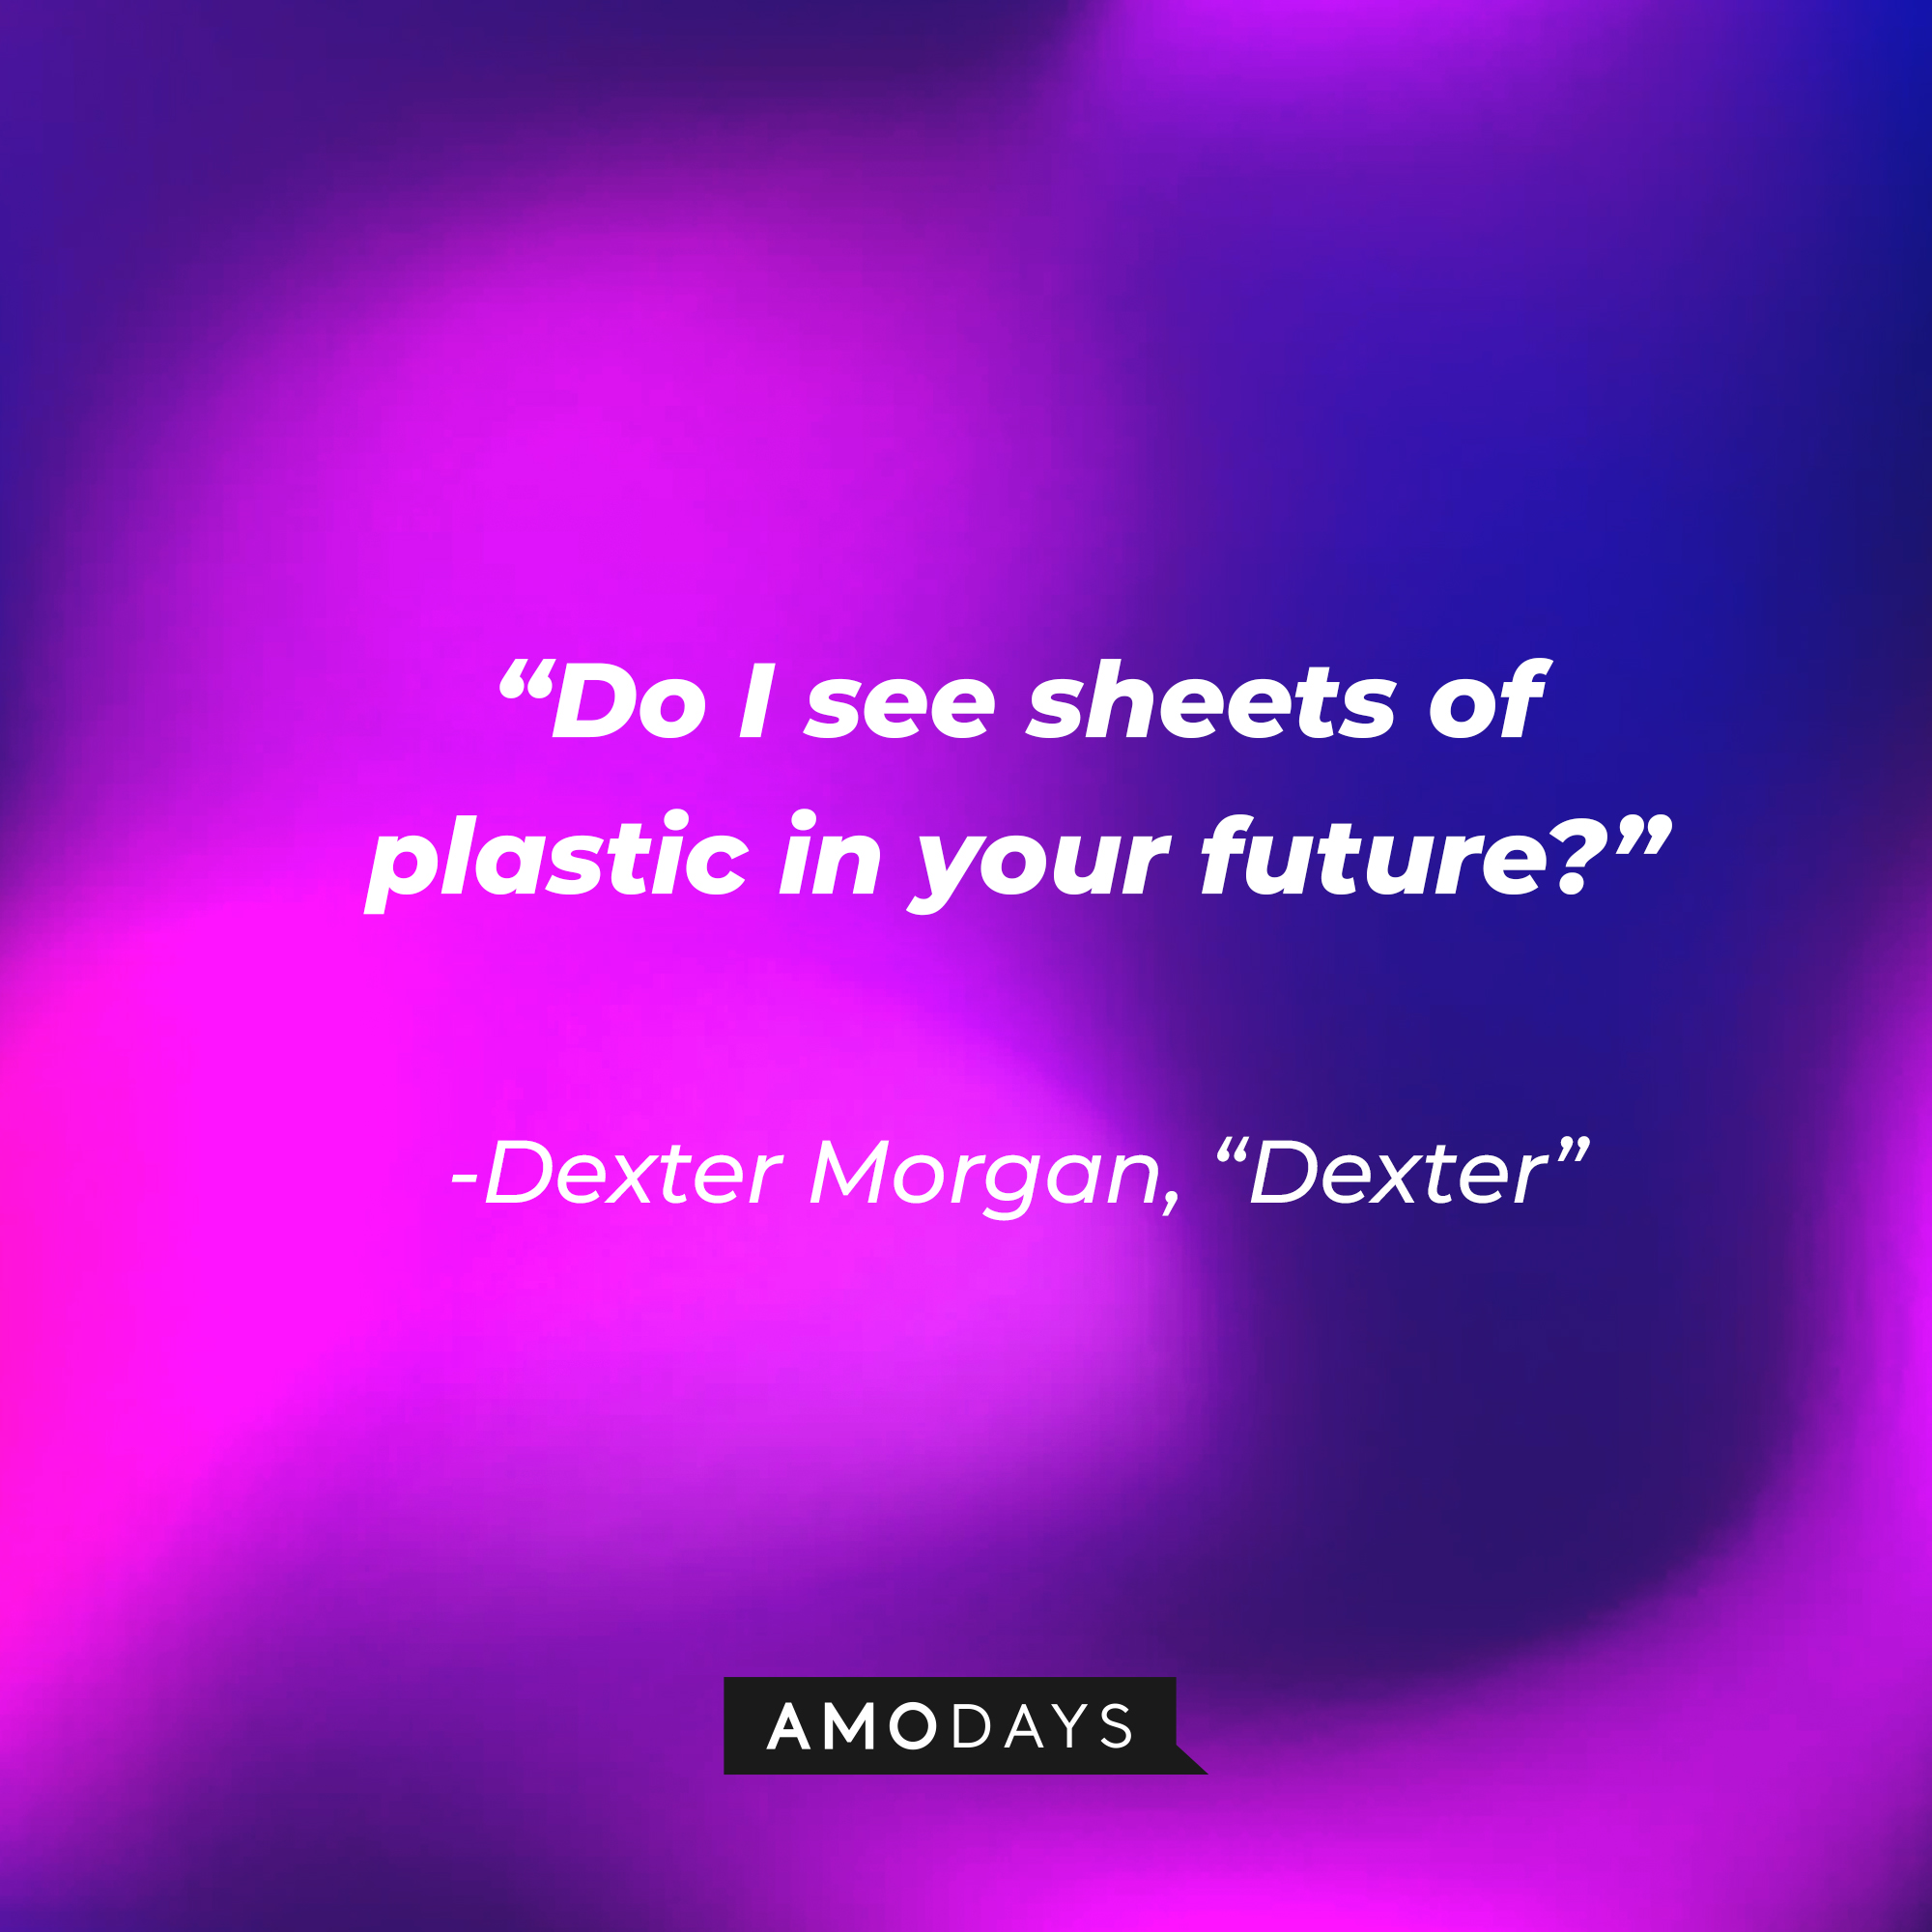 Dexter Morgan's quote from "Dexter:" "Do I see sheets of plastic in your future?” | Source: AmoDays